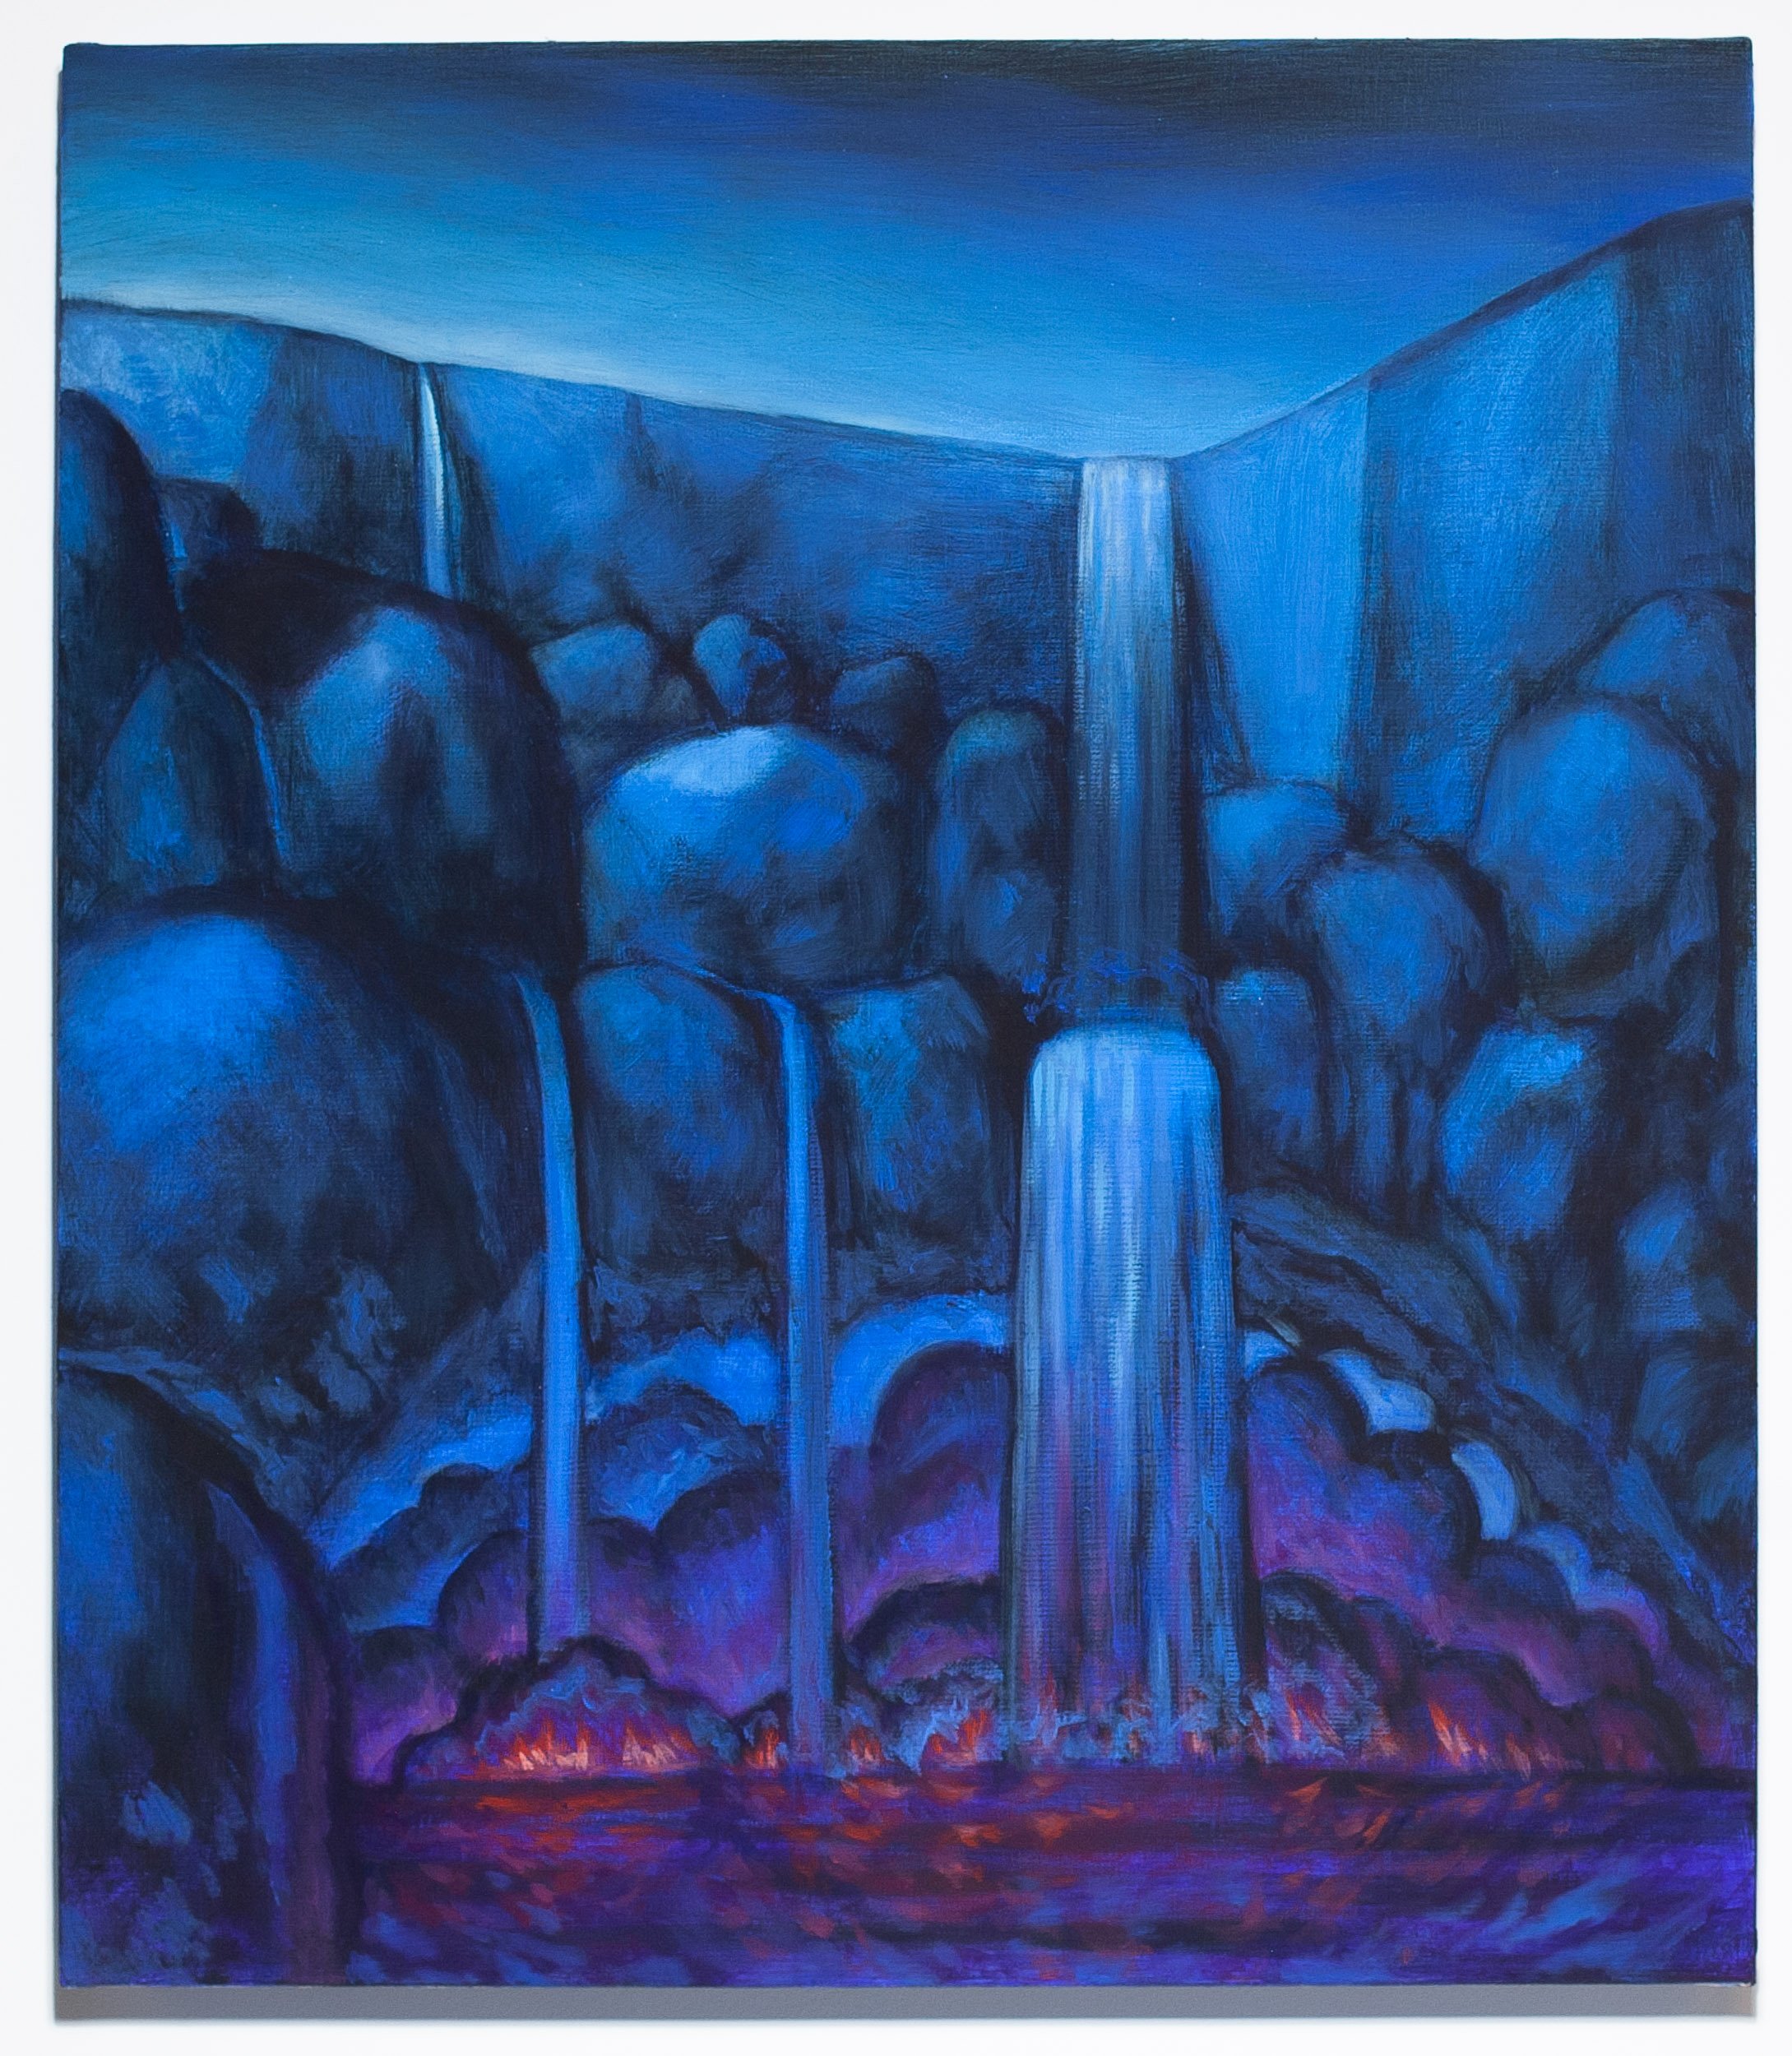   Blue Falls   oil on canvas  22X19 inches  2022 